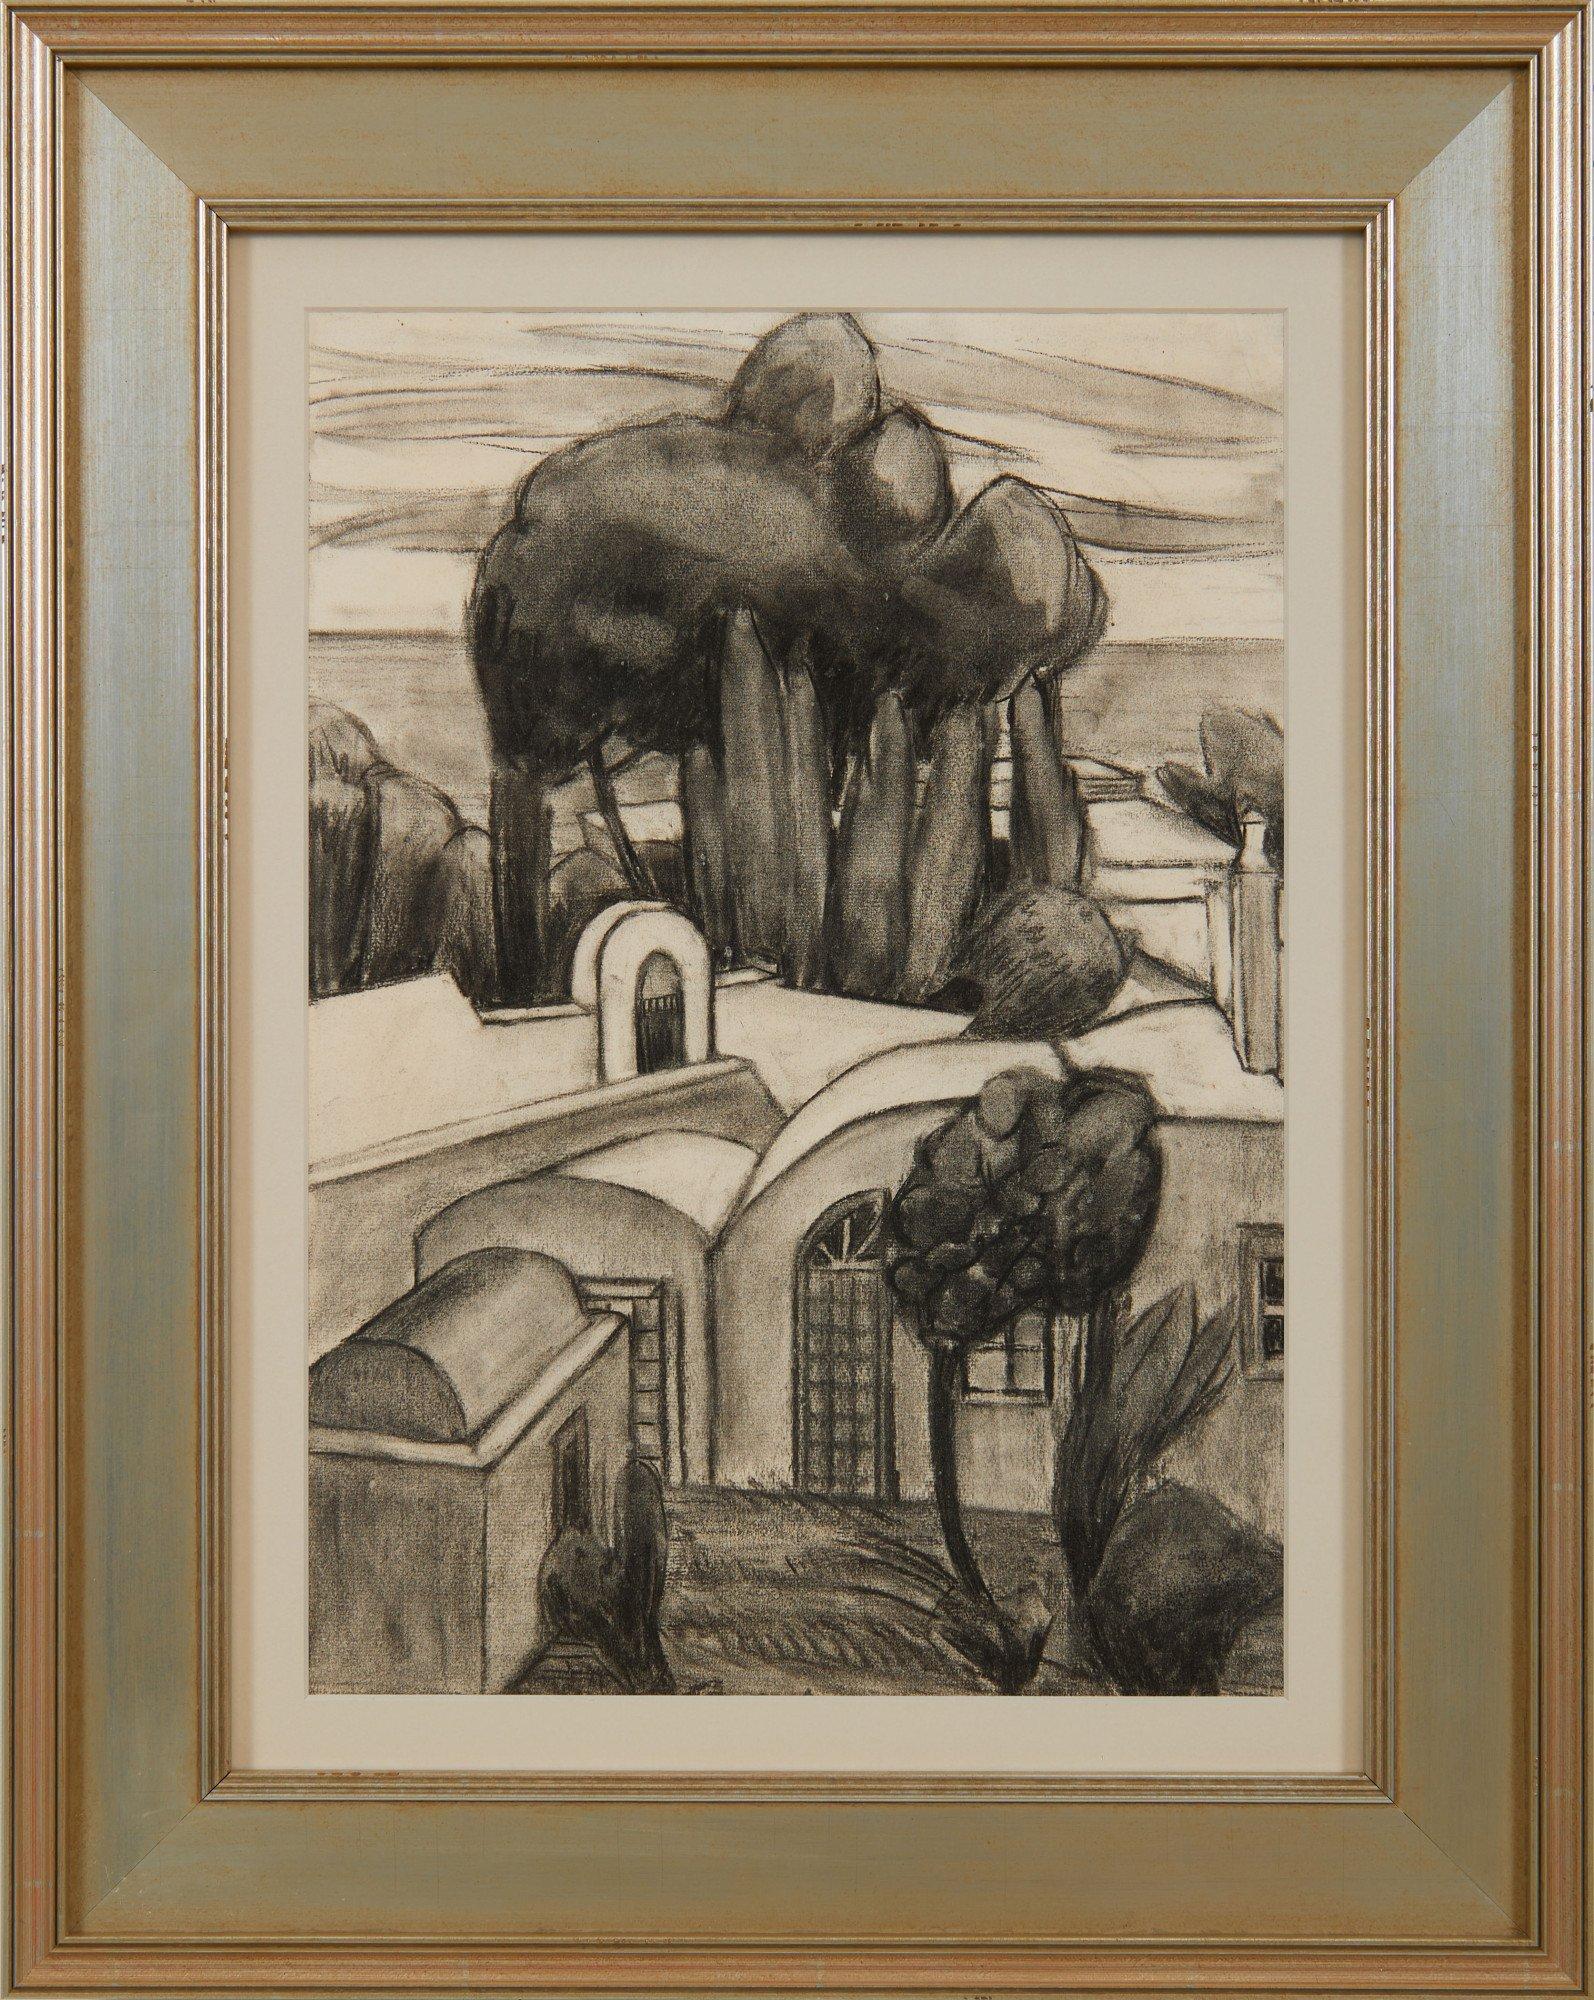 Clara Deike (American, 1881-1964)
Villa Giardino 
Charcoal on paper
Signed and titled verso
17.75 x 12.5 inches

A graduate of the Cleveland School of Art in 1912, Clara Deike was part of the watercolor movement in Northeast Ohio whereby the outdoor